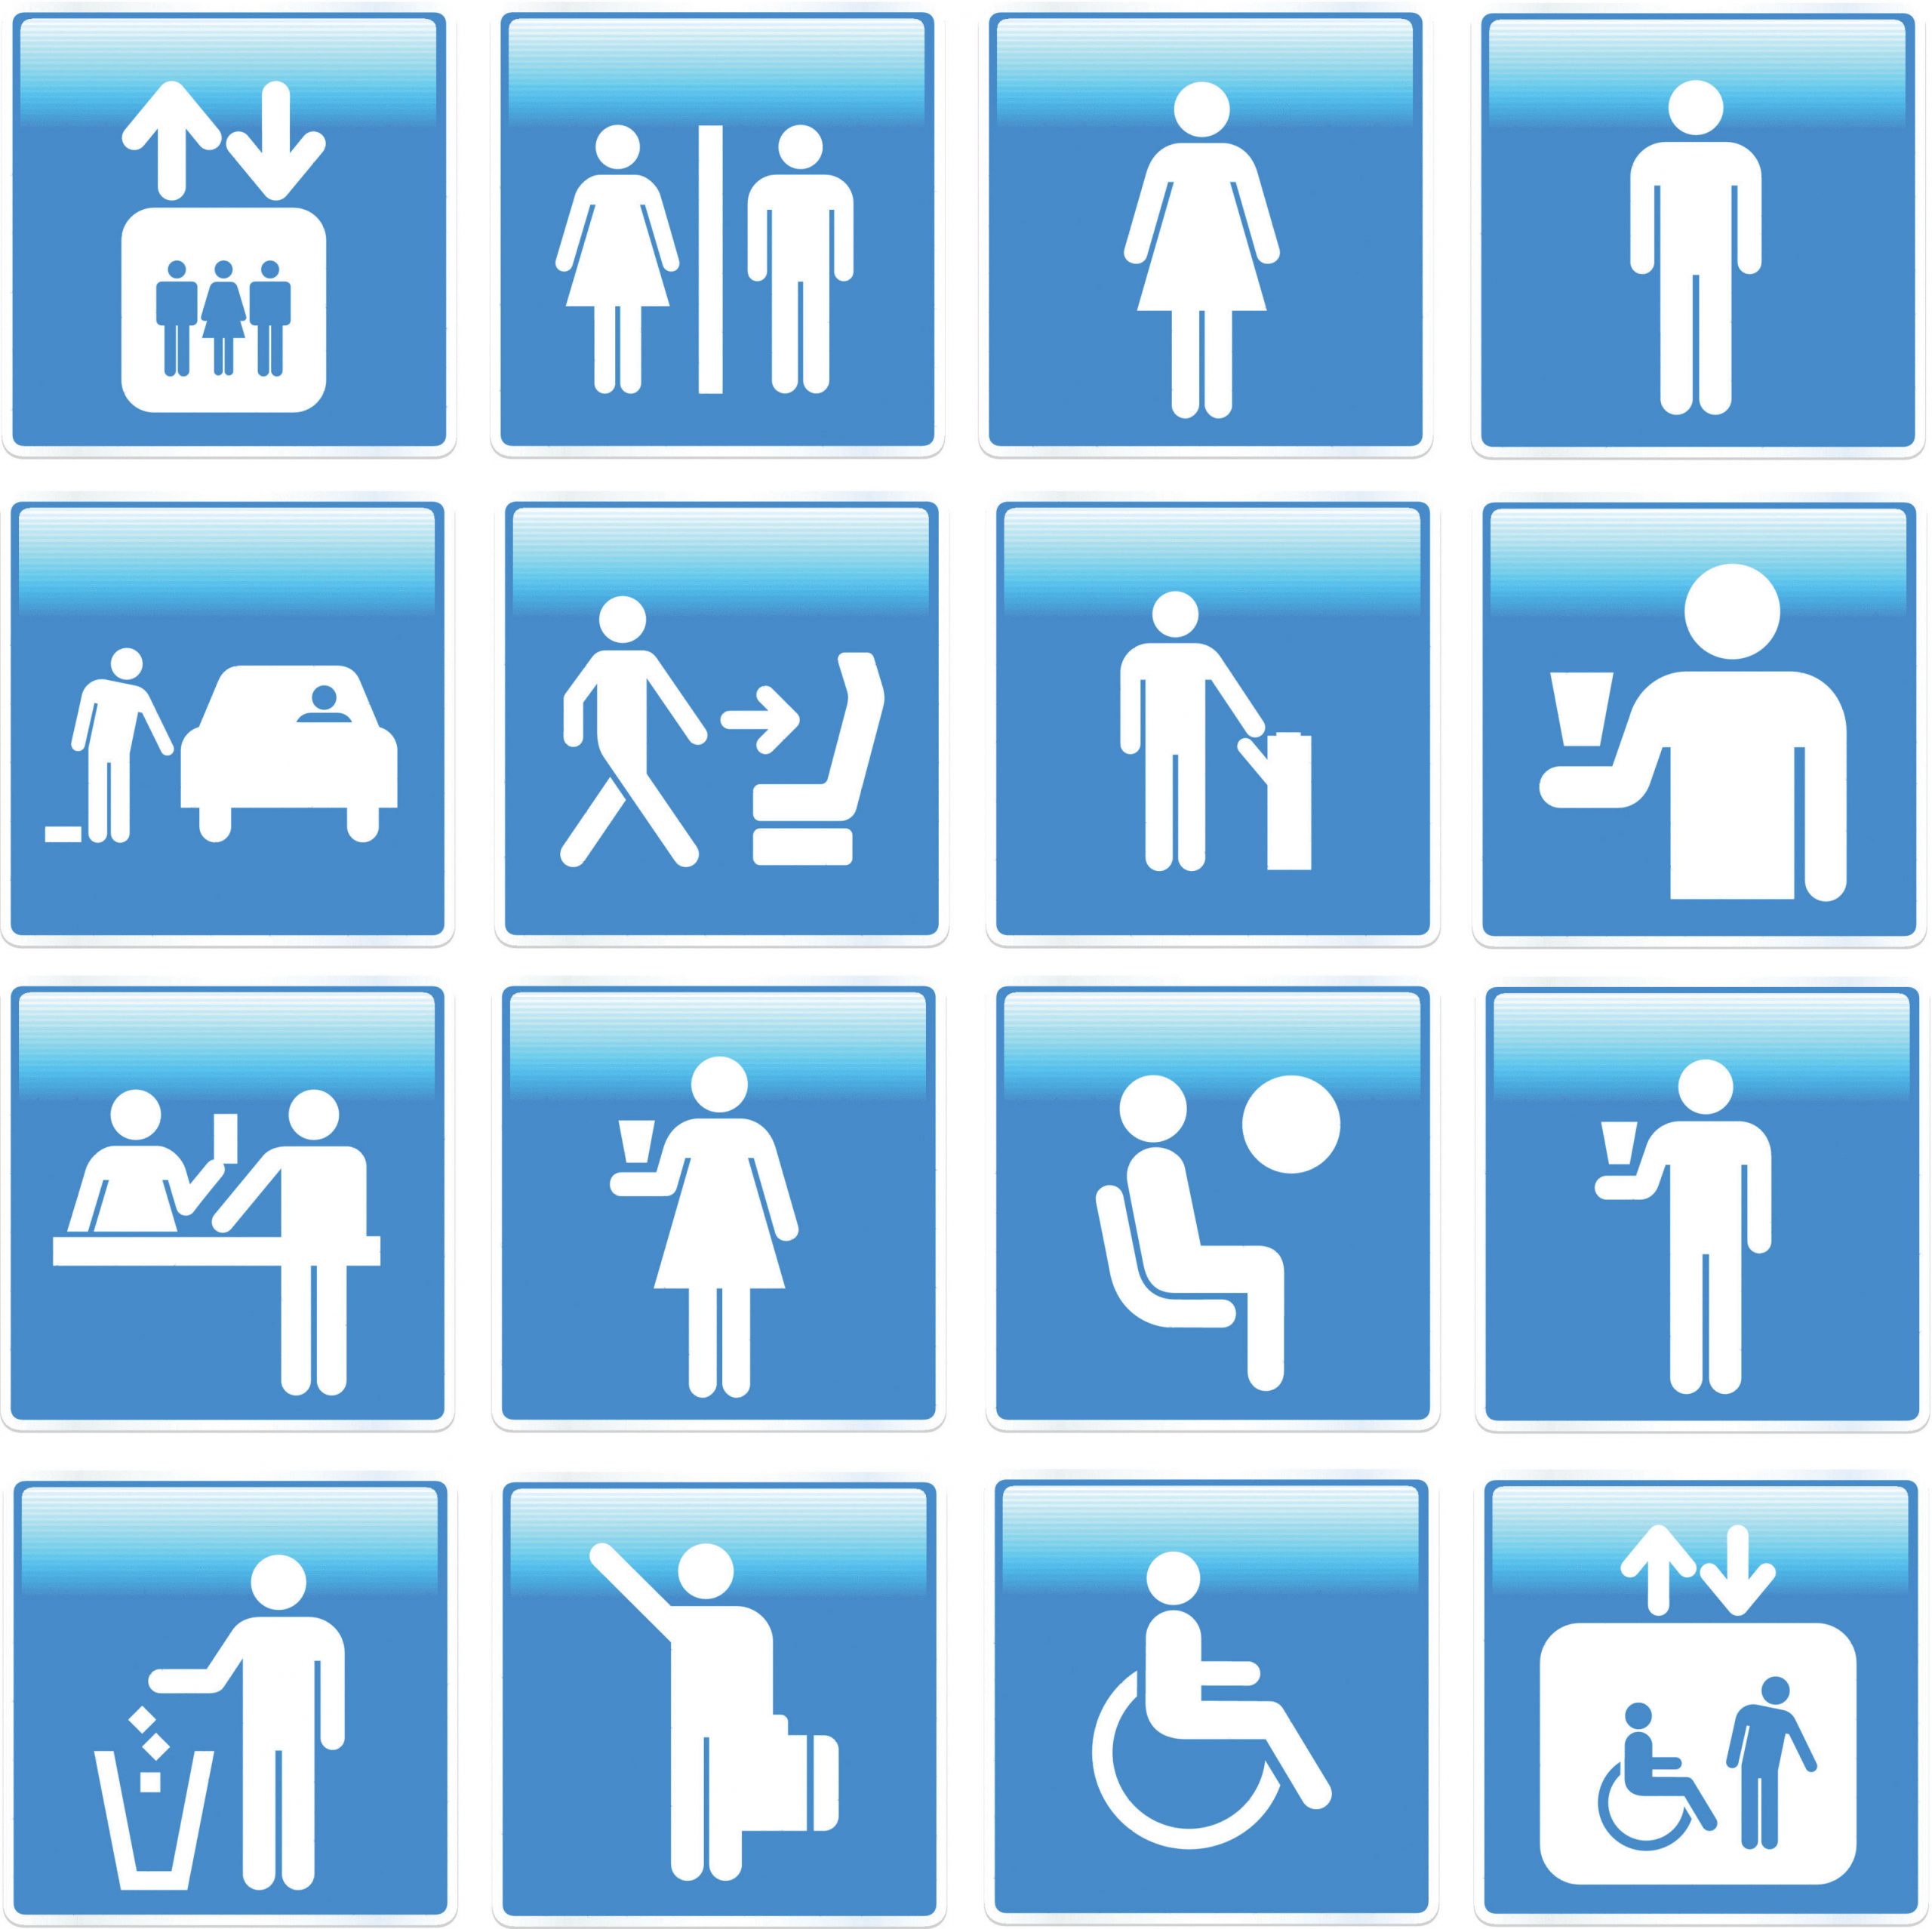 Collage of commonly employed pictograms found on maps.